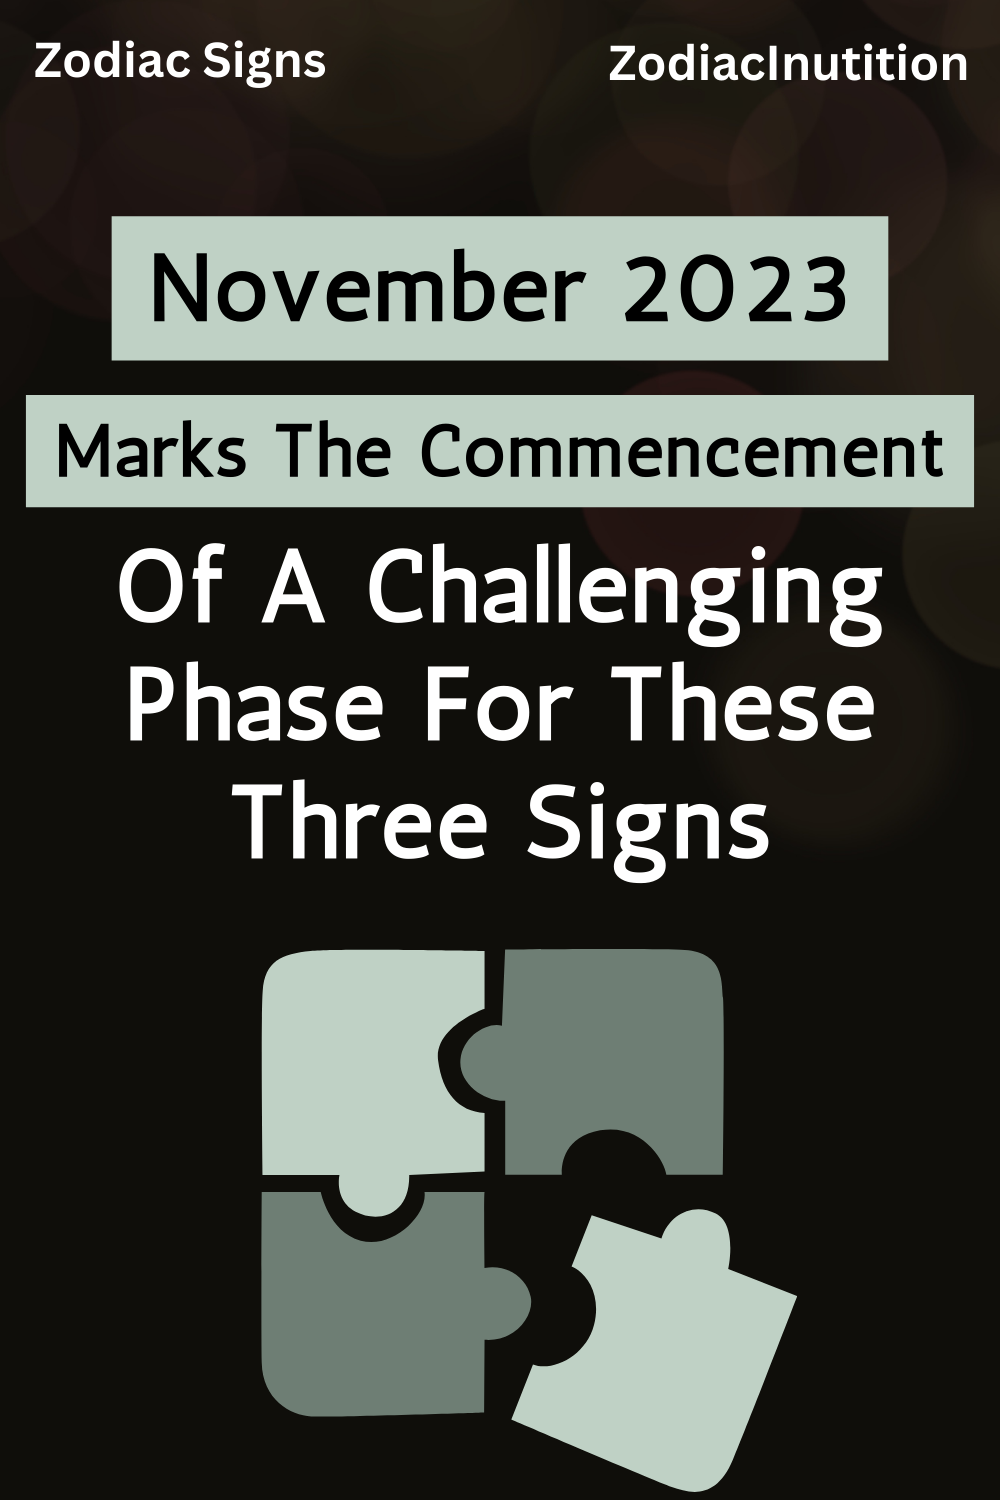 November 2023 Marks The Commencement Of A Challenging Phase For These Three Signs